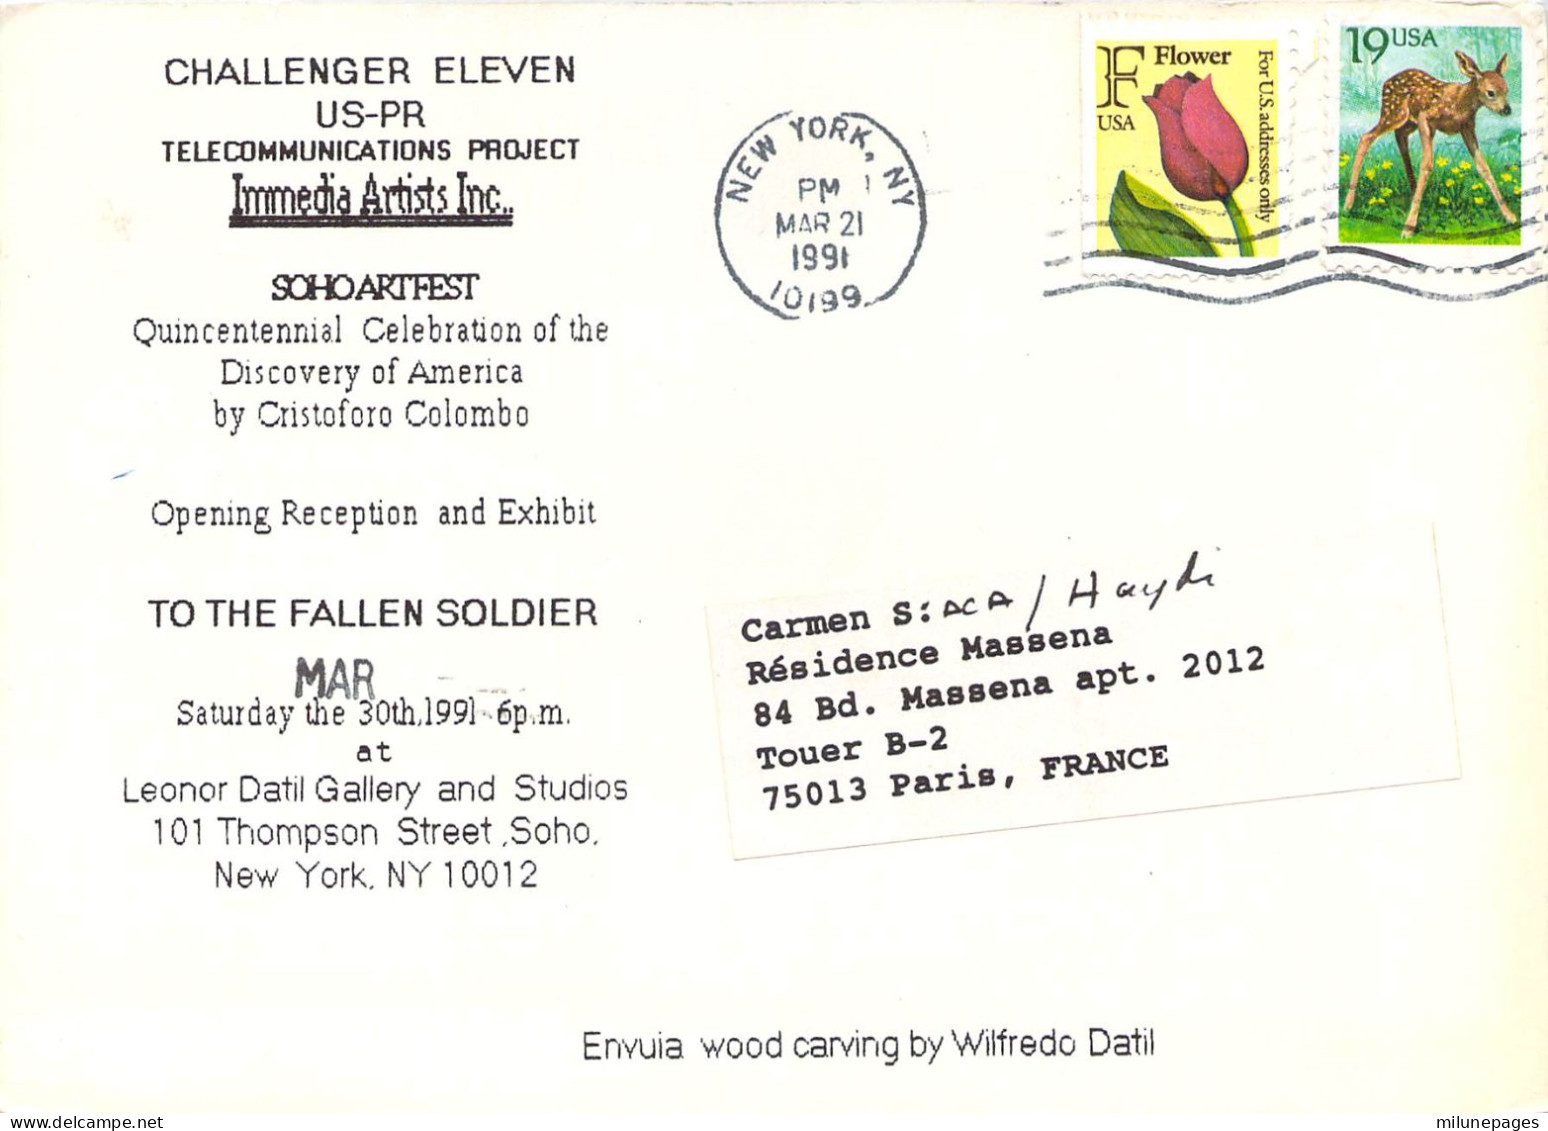 USA NY Challenger Eleven US-PR Immedia Artists Inc. Sohoartfest Mar. 1991 Enyuia Wood Carving By Wilfredo Datil - Expositions